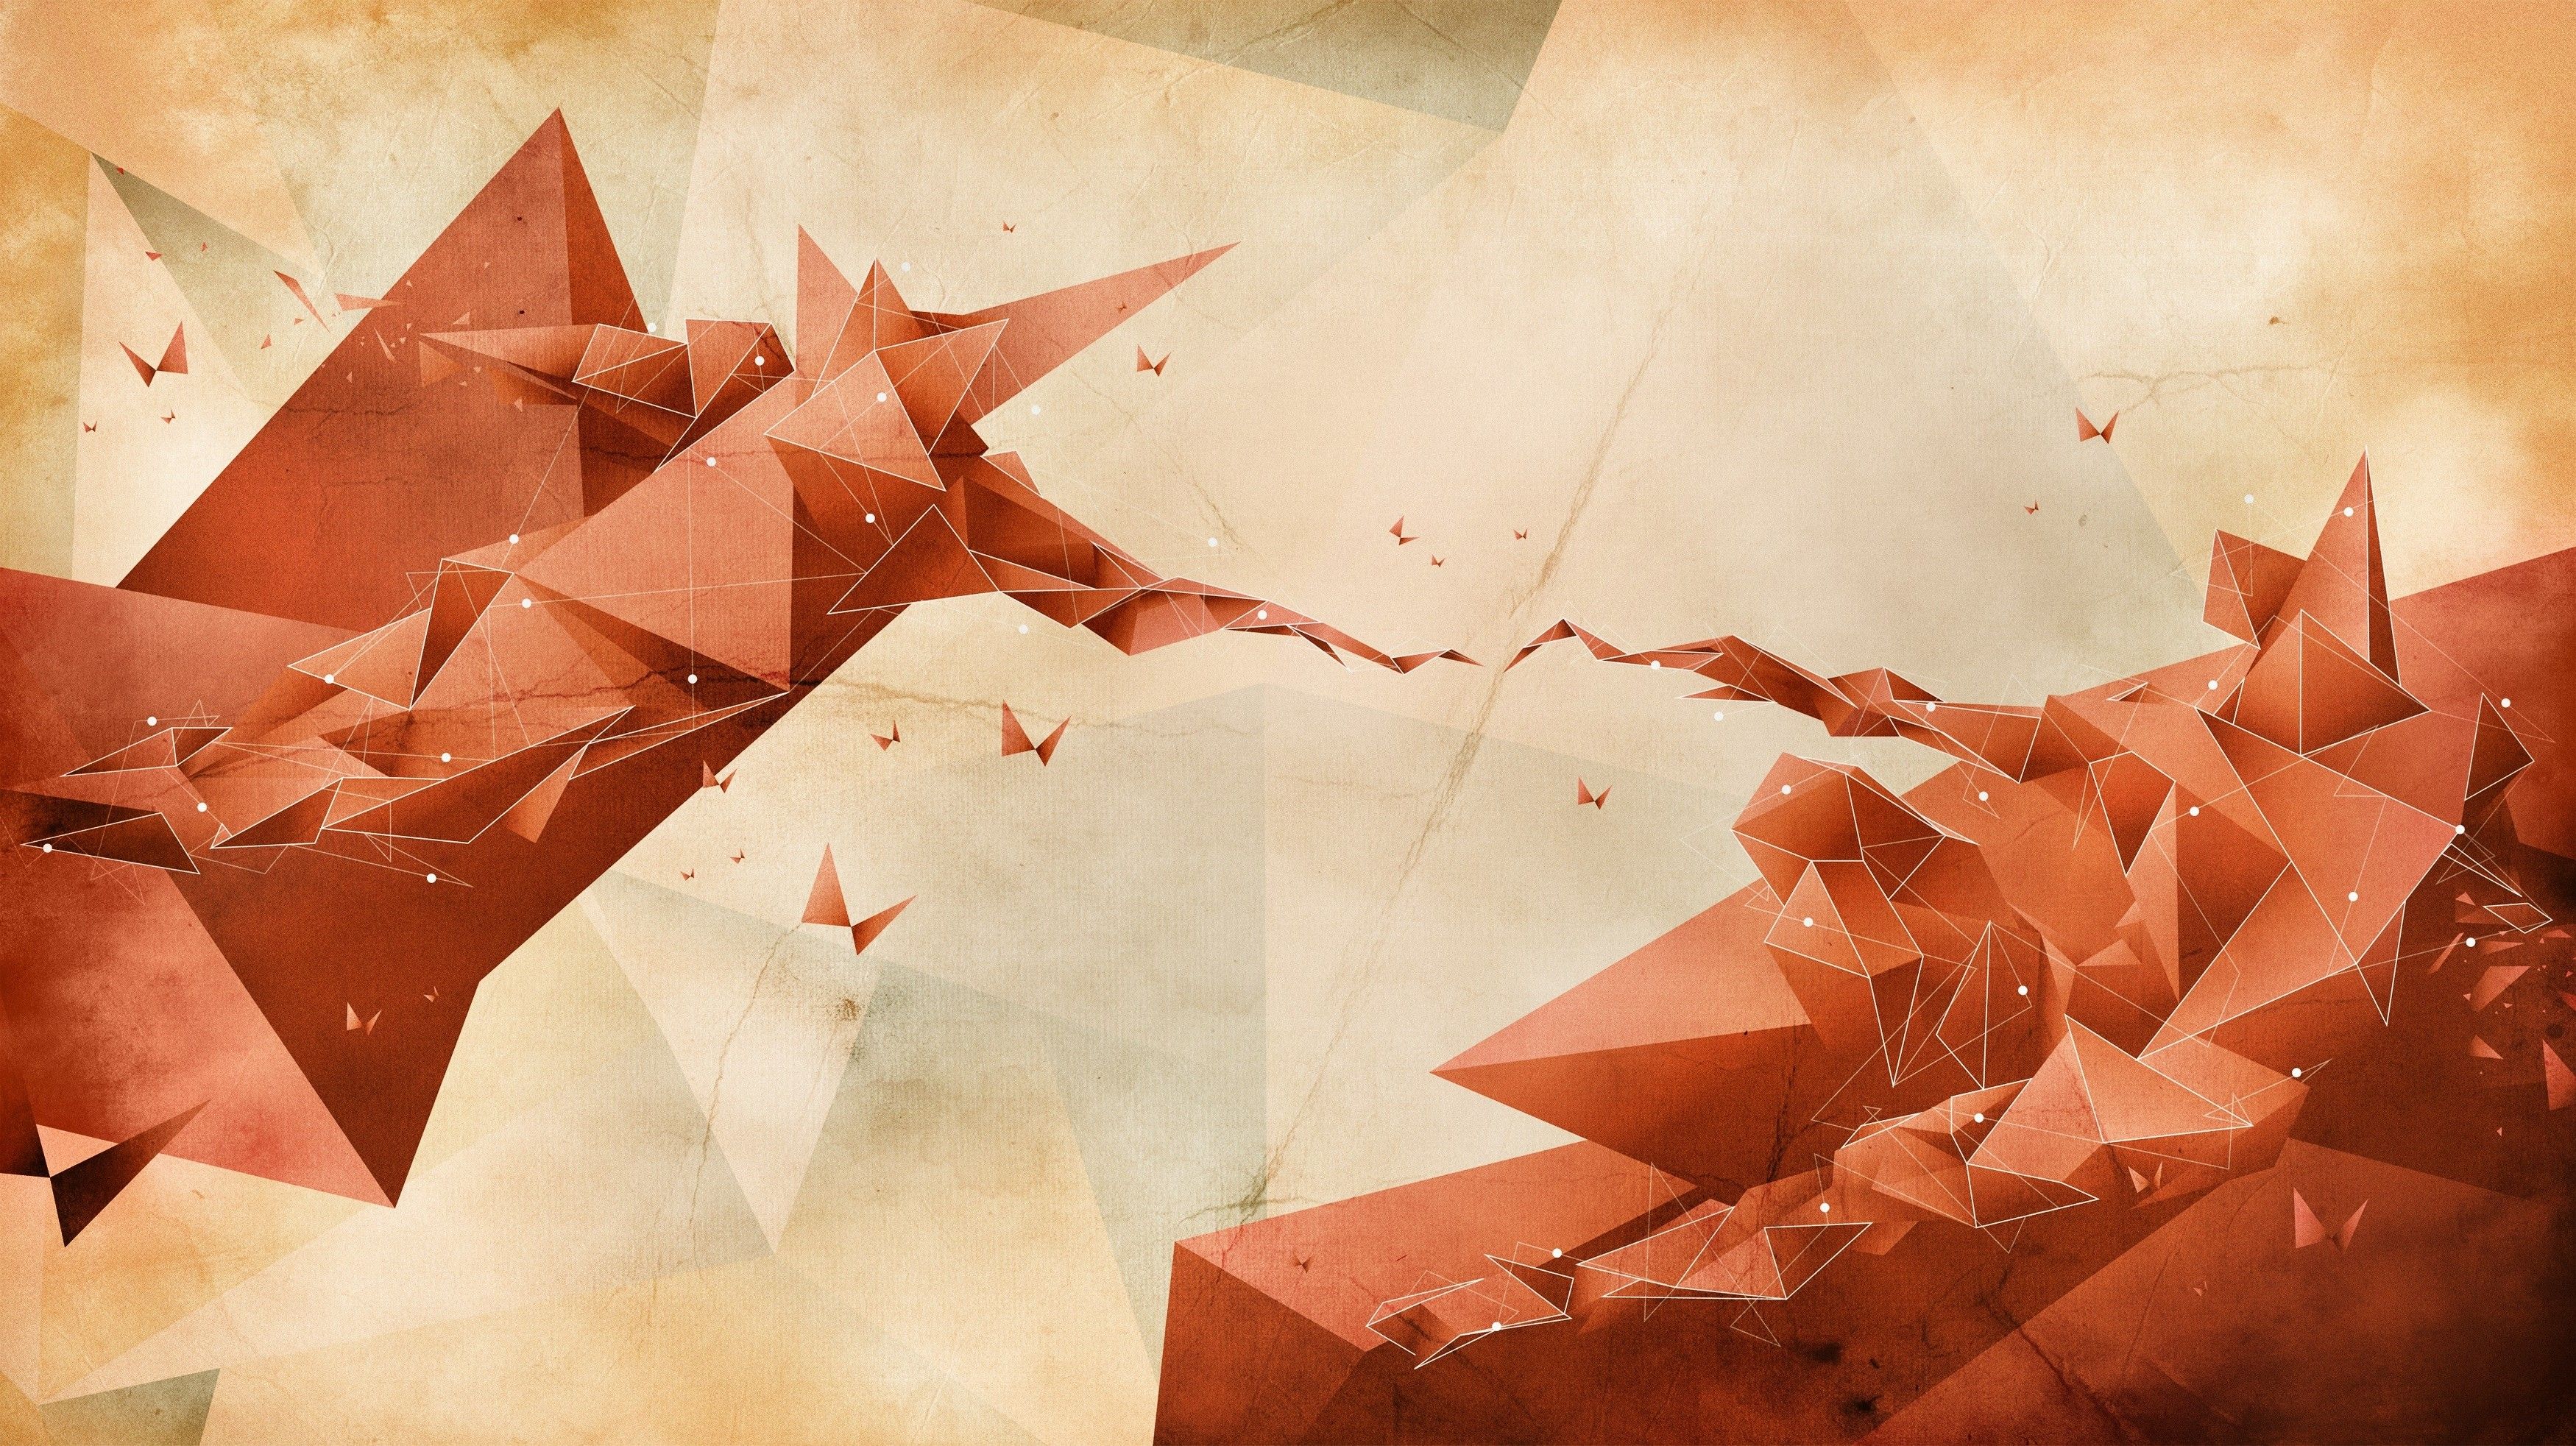 An abstract image of red and orange geometric shapes on a beige background. - The Creation of Adam